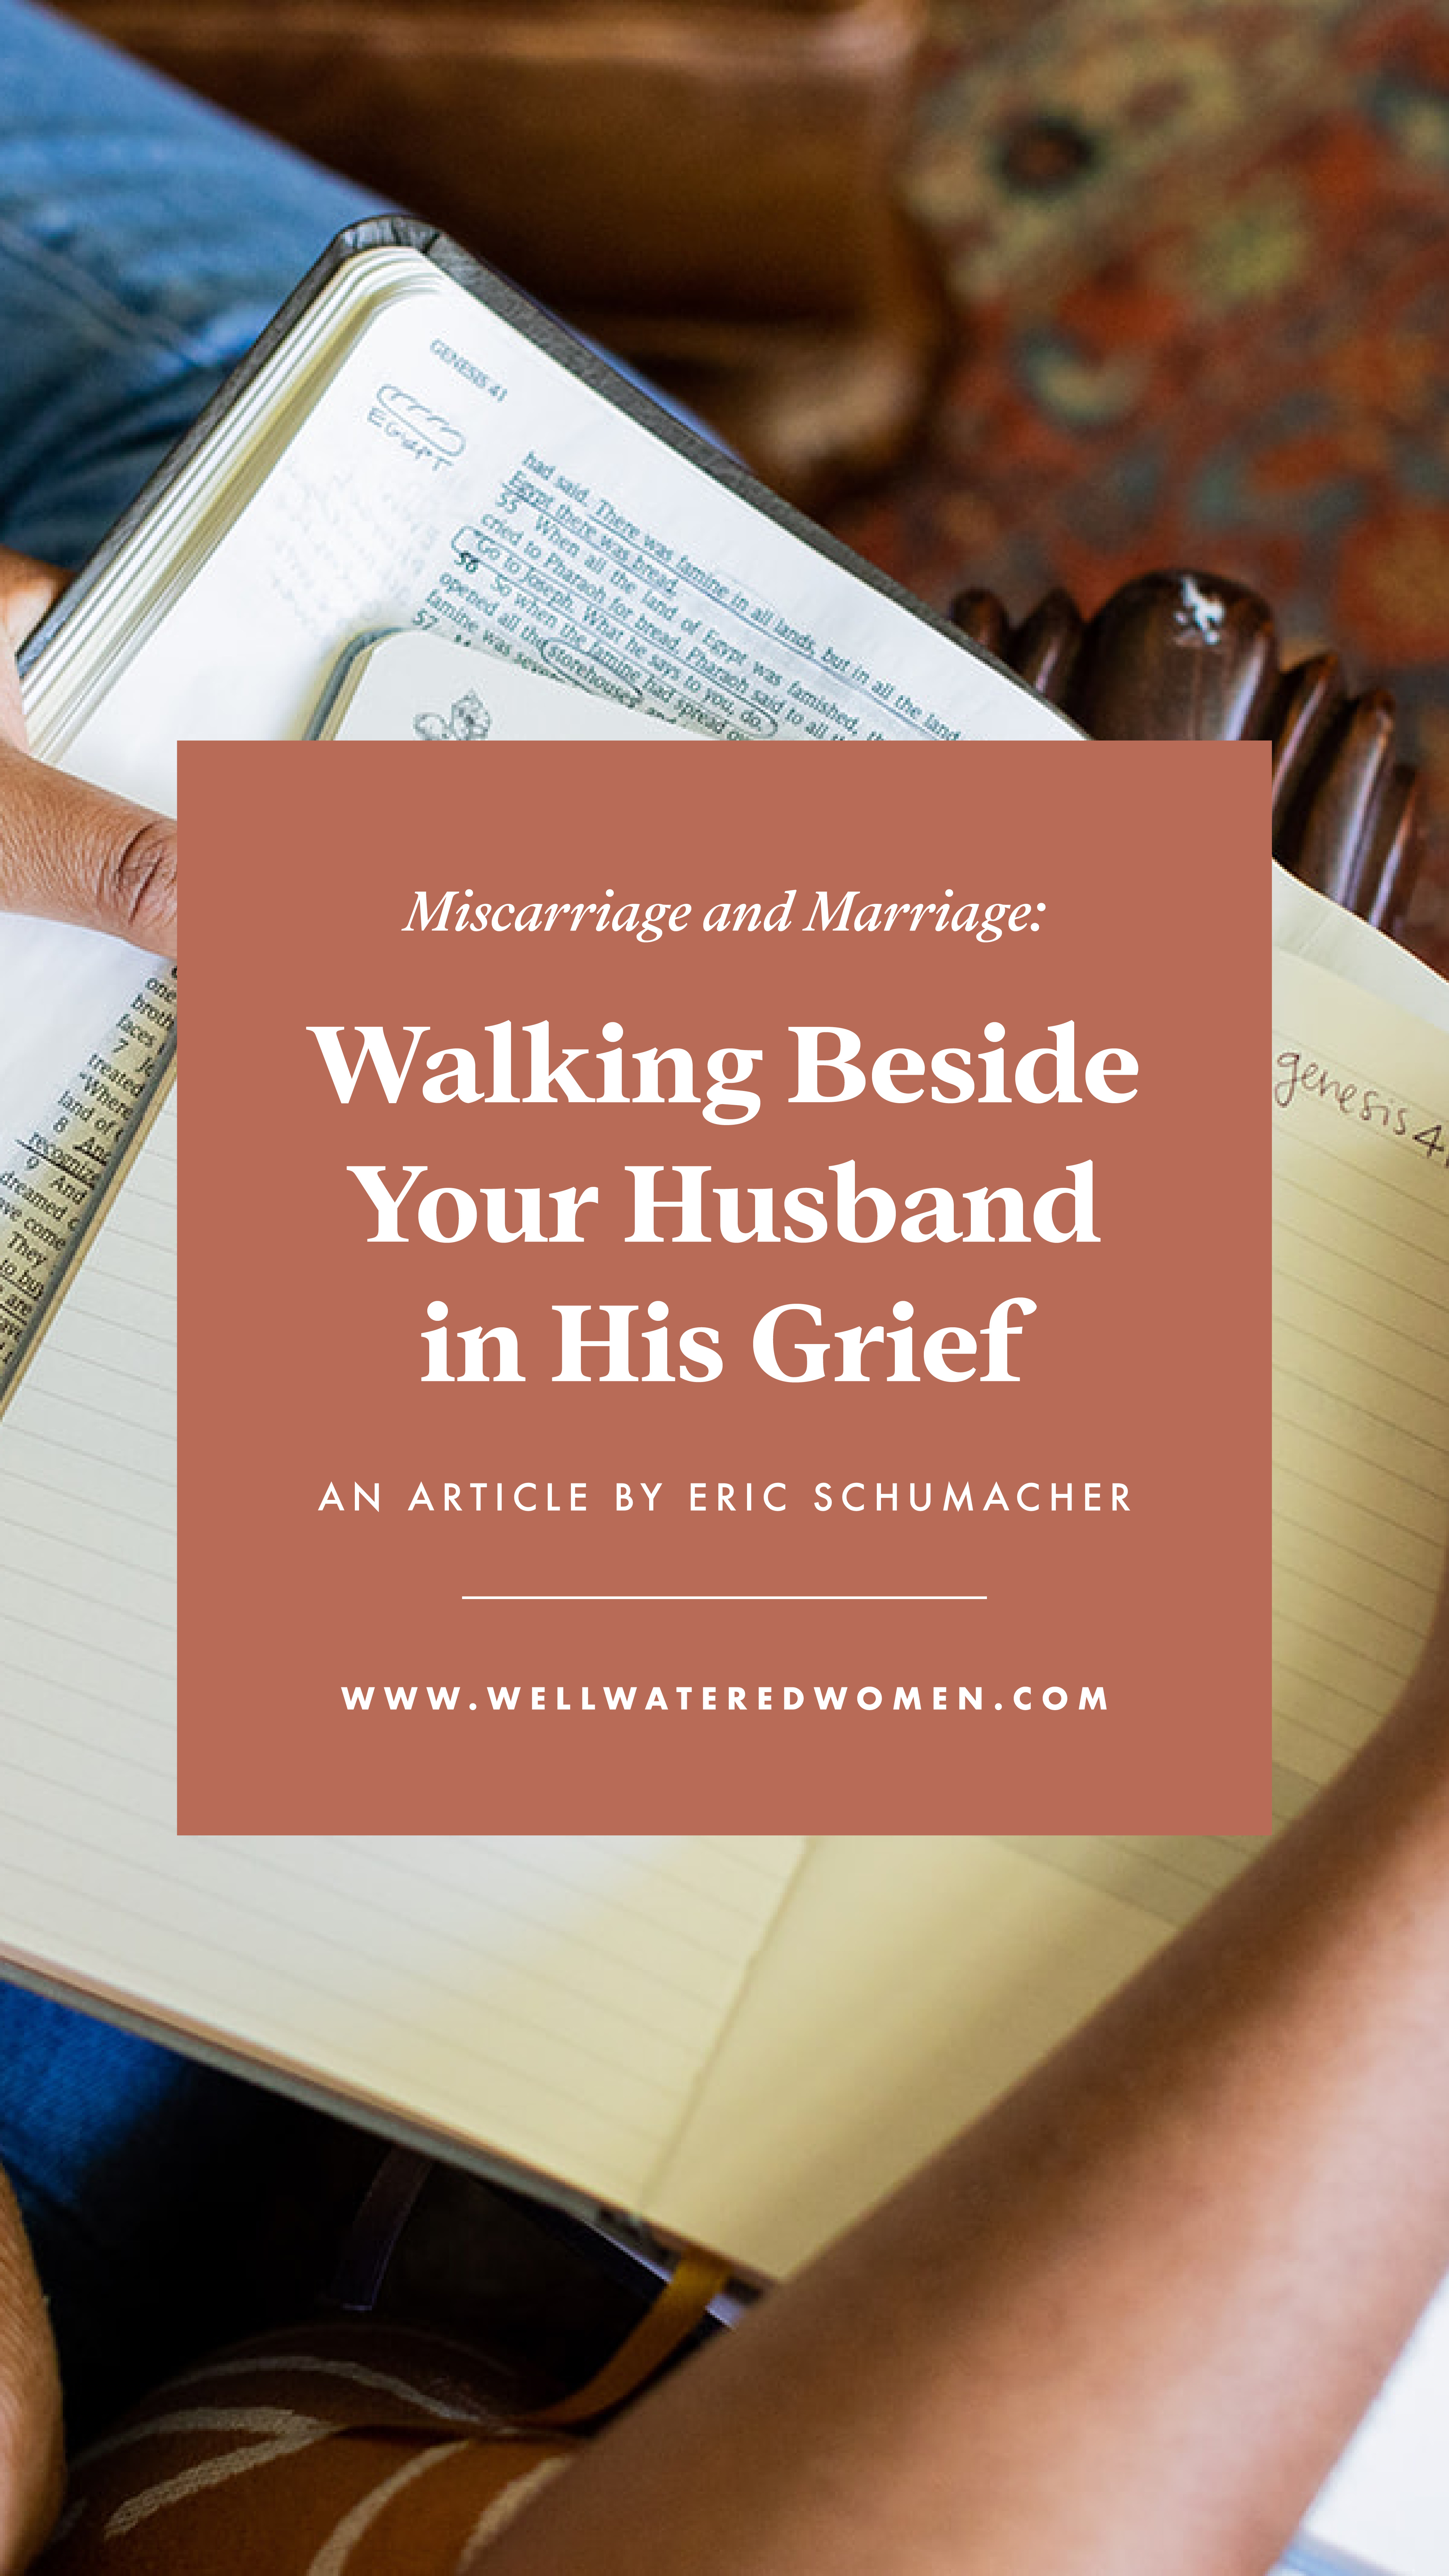 Miscarriage and Marriage-Walking Beside Your Husband in His Grief-An Article by Eric Schumacher